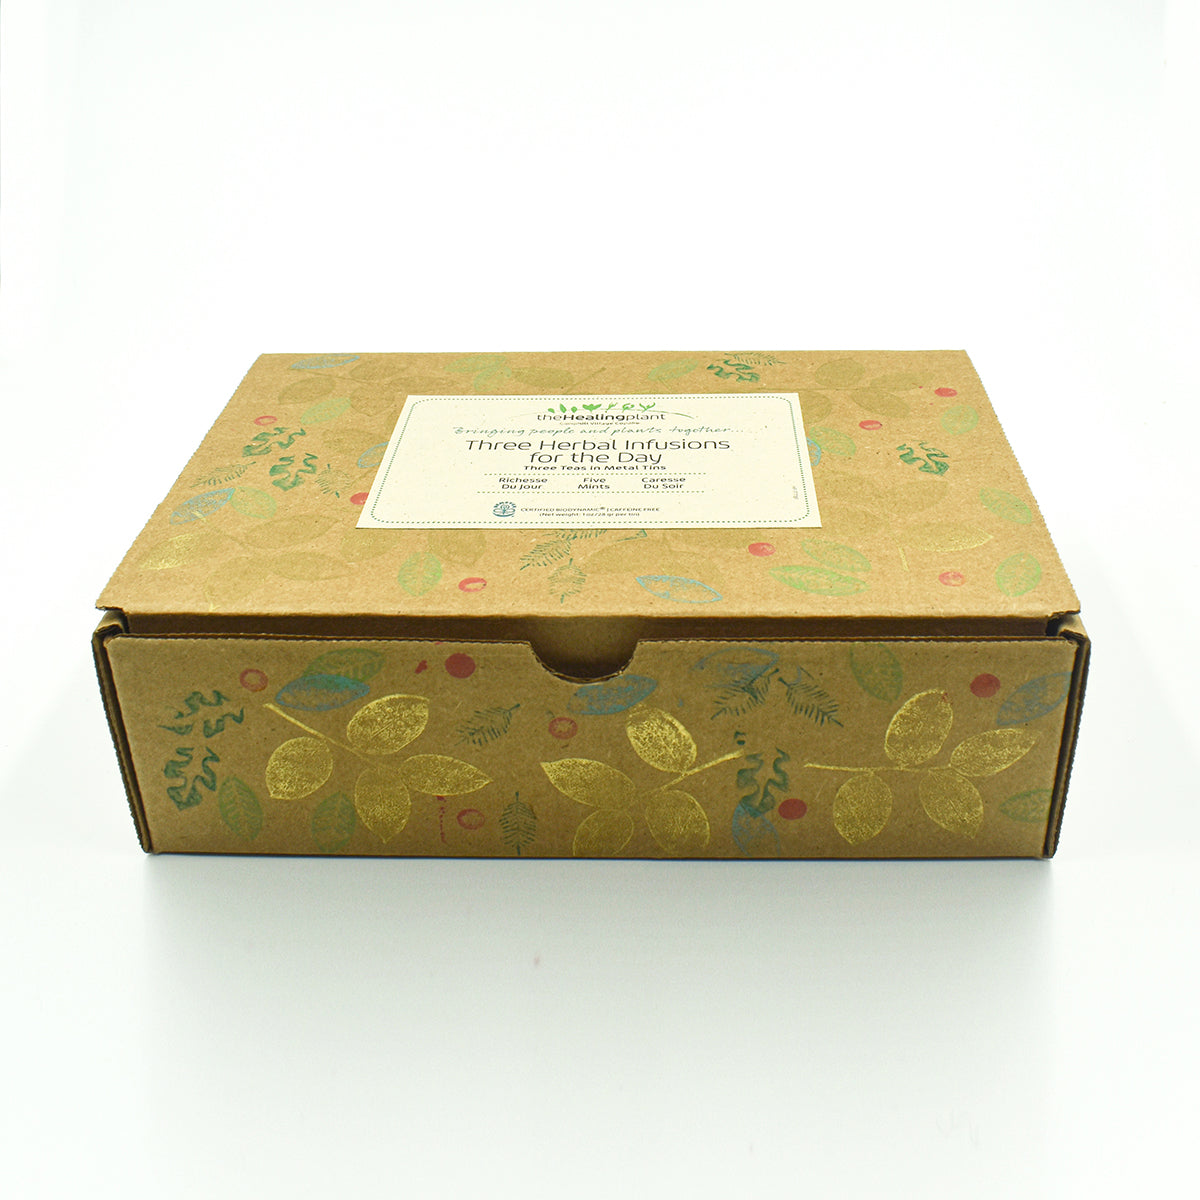 Infusion & tea gift boxes, gift ideas for your nearest and dearest